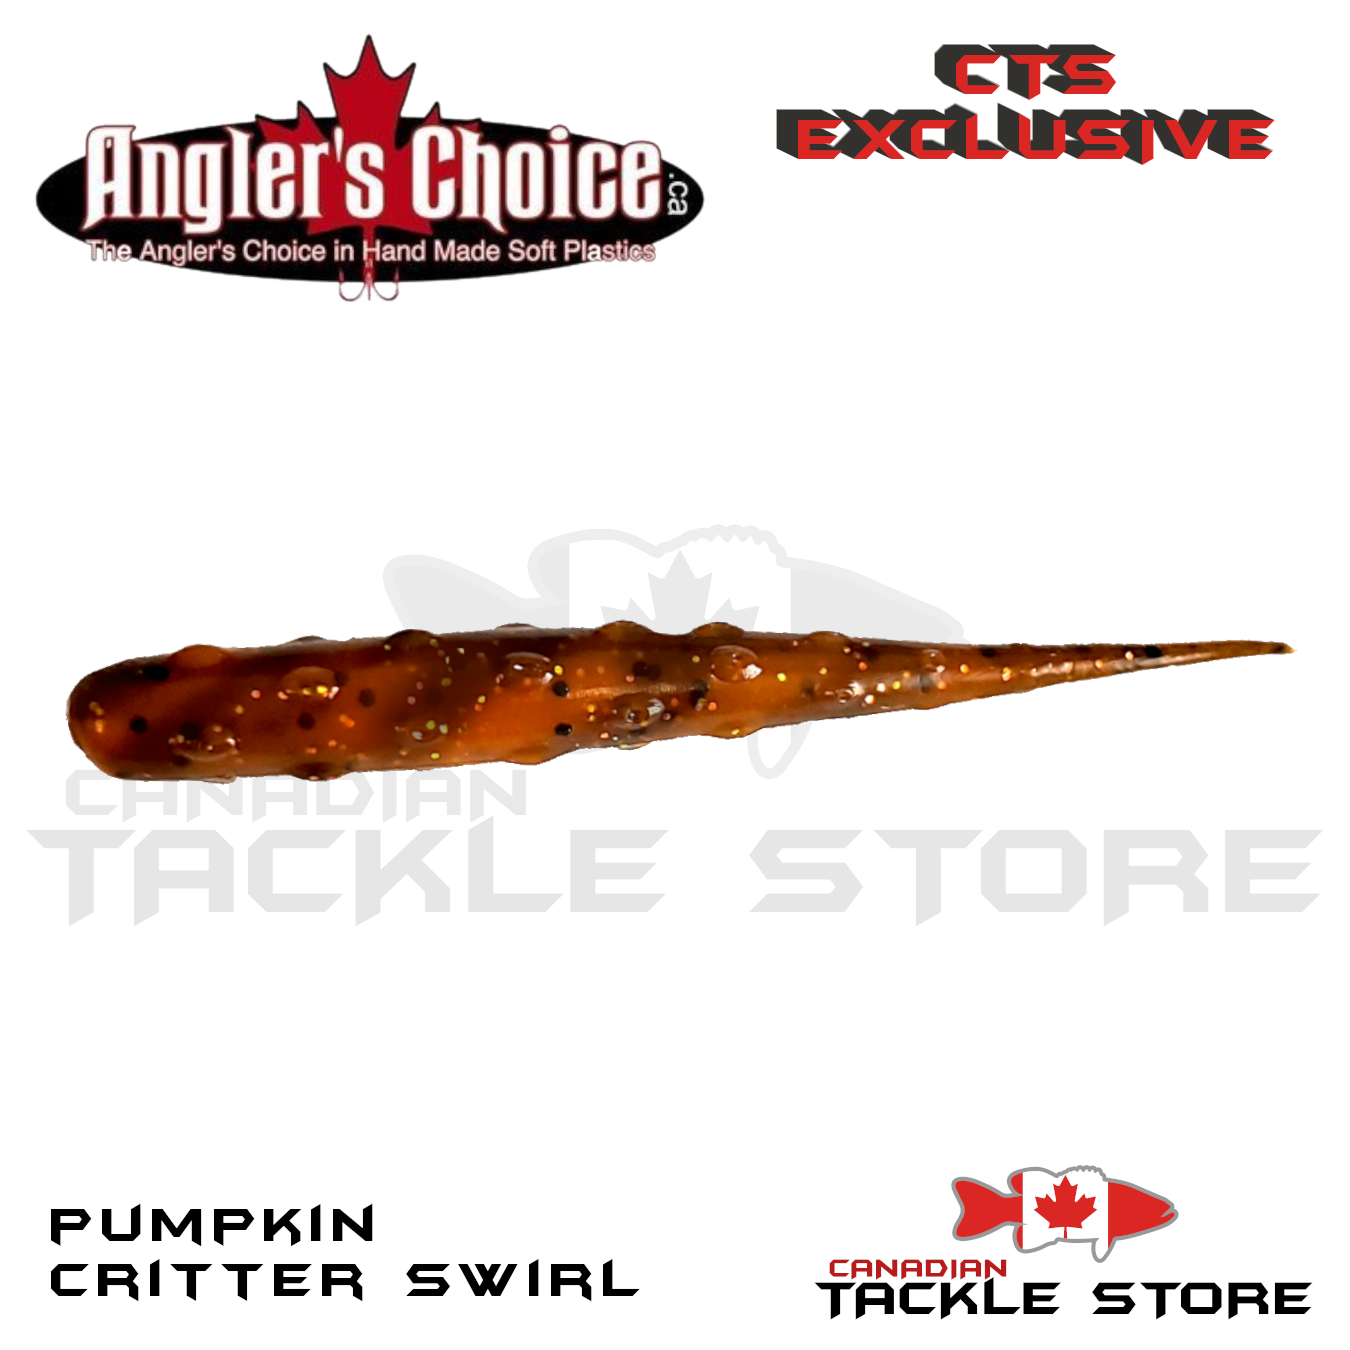 Angler's Choice – Canadian Tackle Store